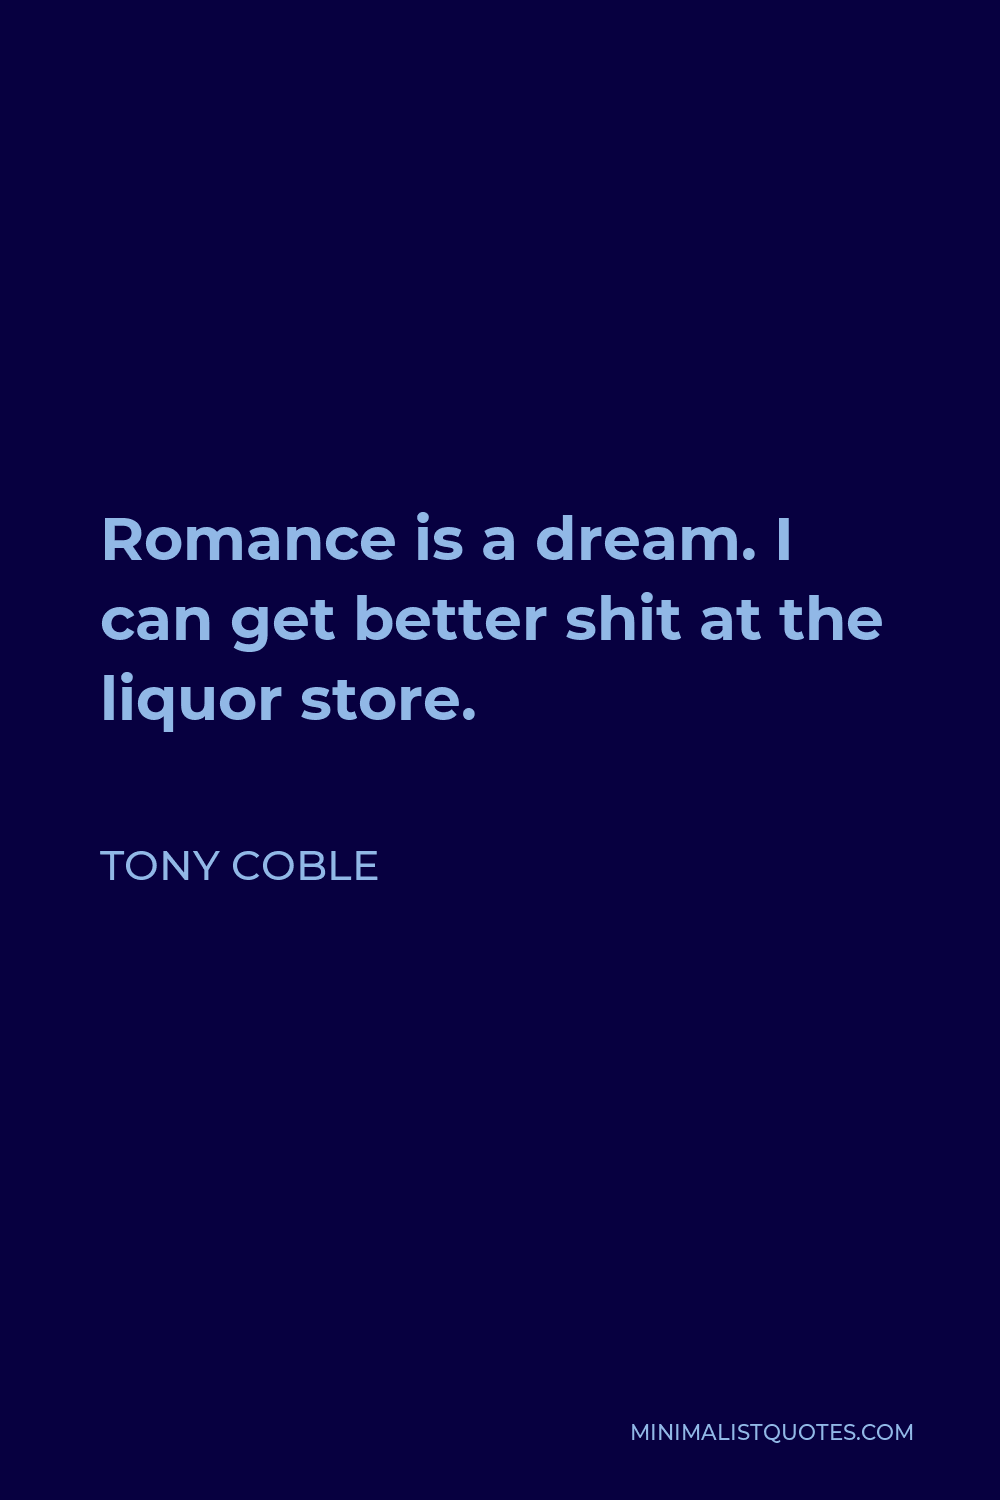 Tony Coble Quote - Romance is a dream. I can get better shit at the liquor store.